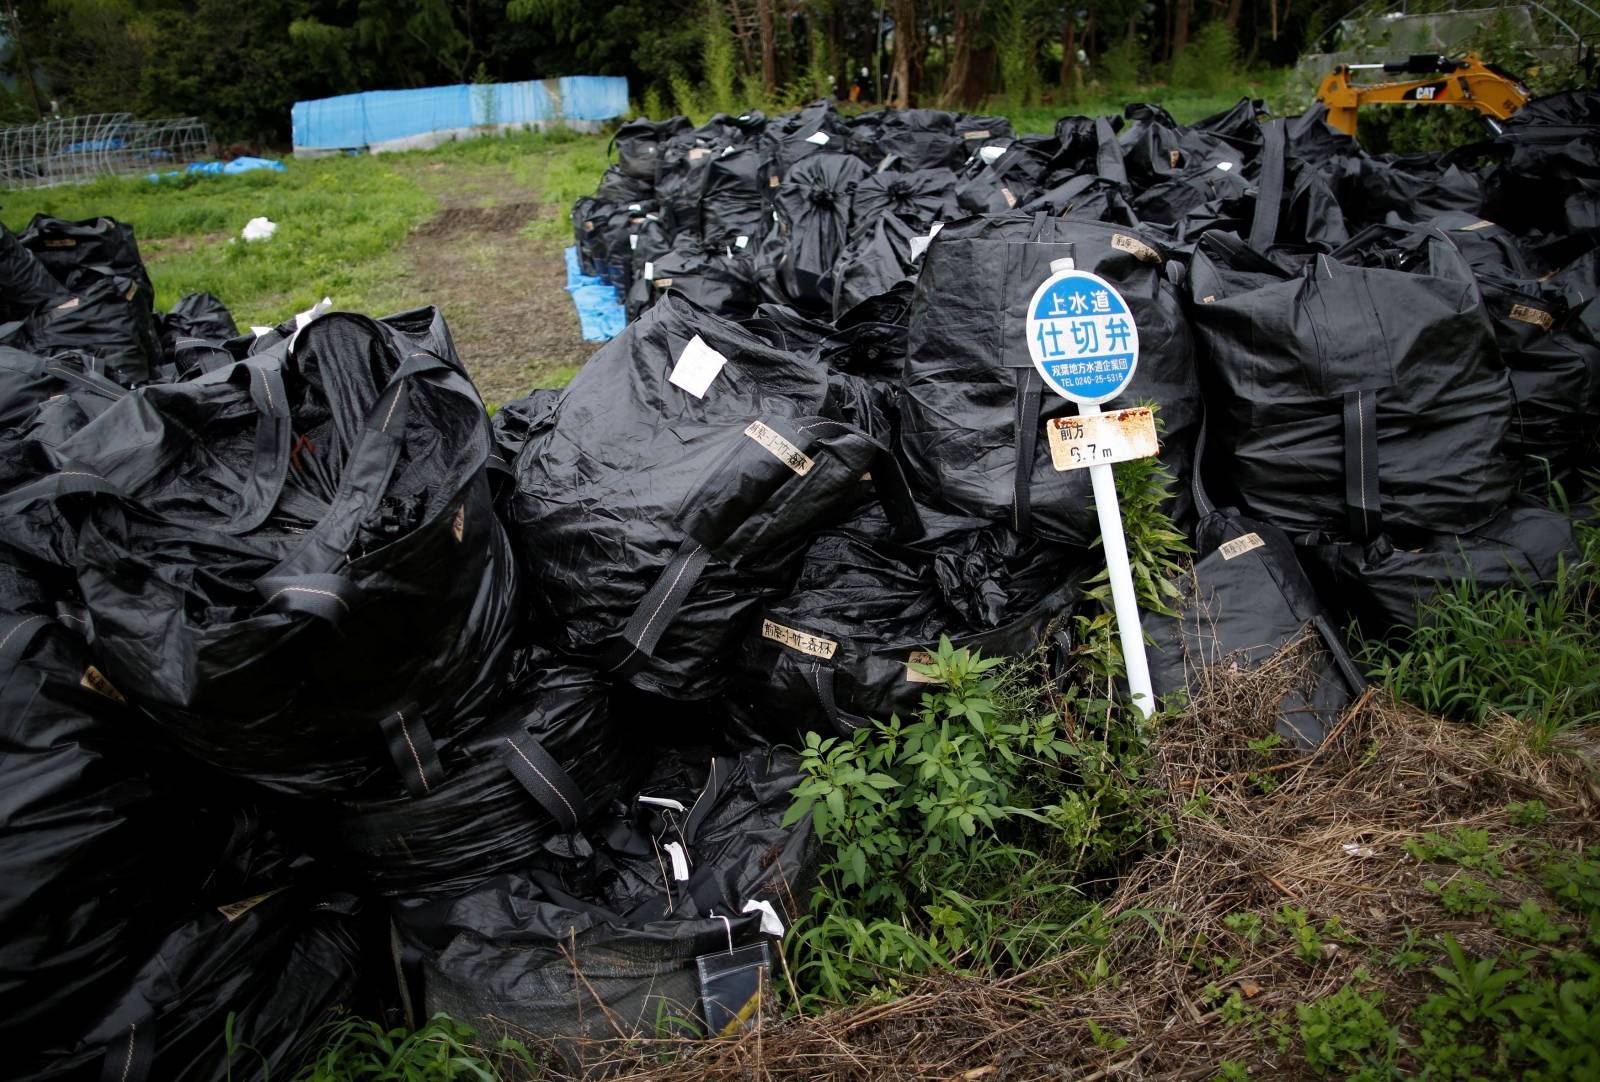 FILE PHOTO: Waste containing irradiated soil, leaves and debris from the decontamination operation are collected in Naraha town, Fukushima prefecture